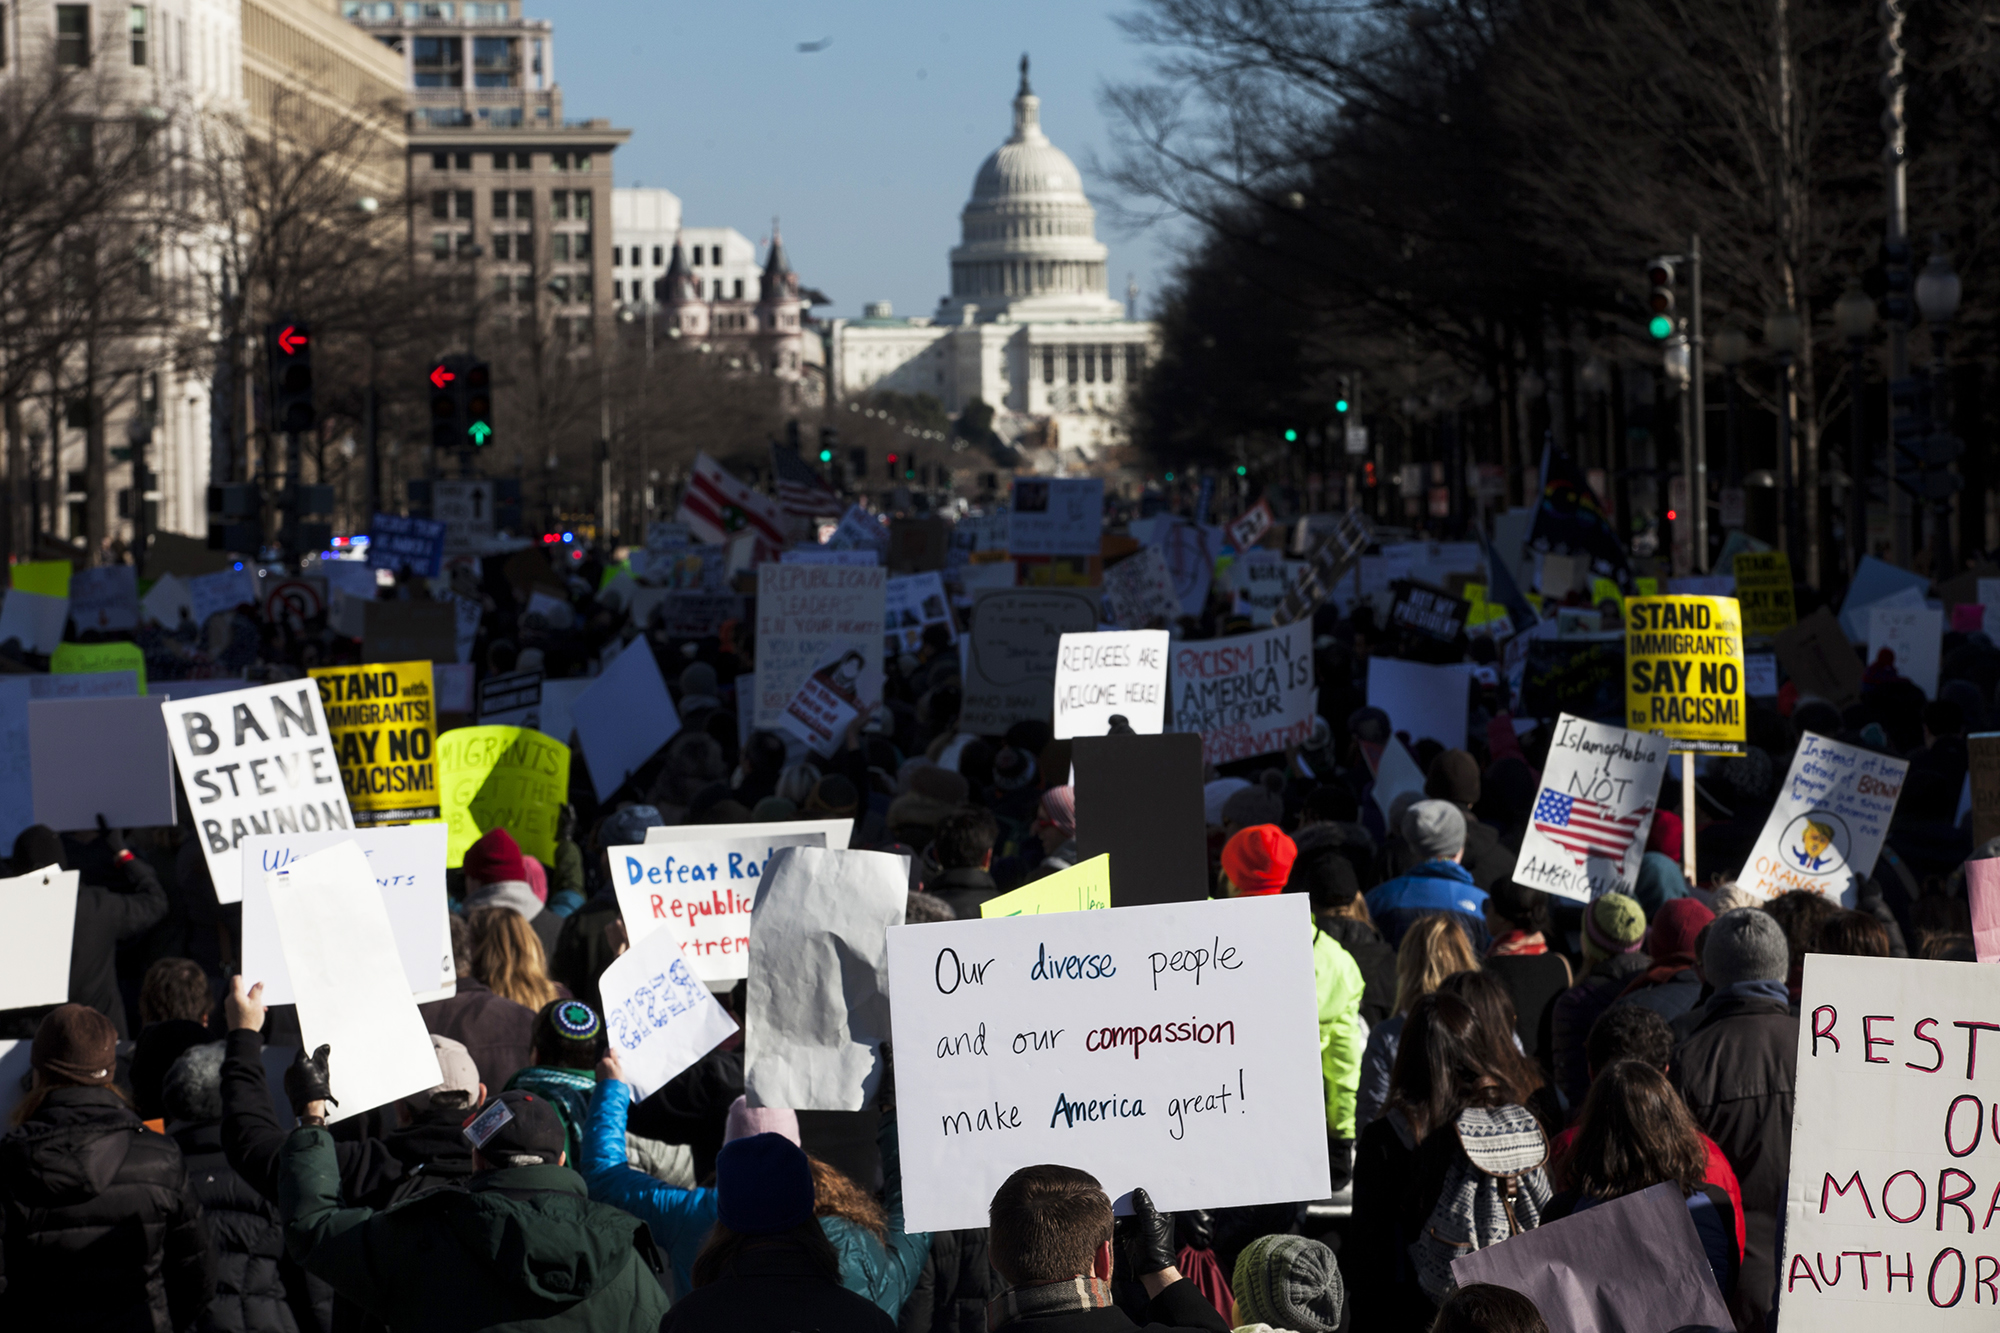 Demonstrators march from the White House to the Capitol Building, on Feb. 4, 2017 in Washington, D.C. (Zach Gibson—Getty Images)